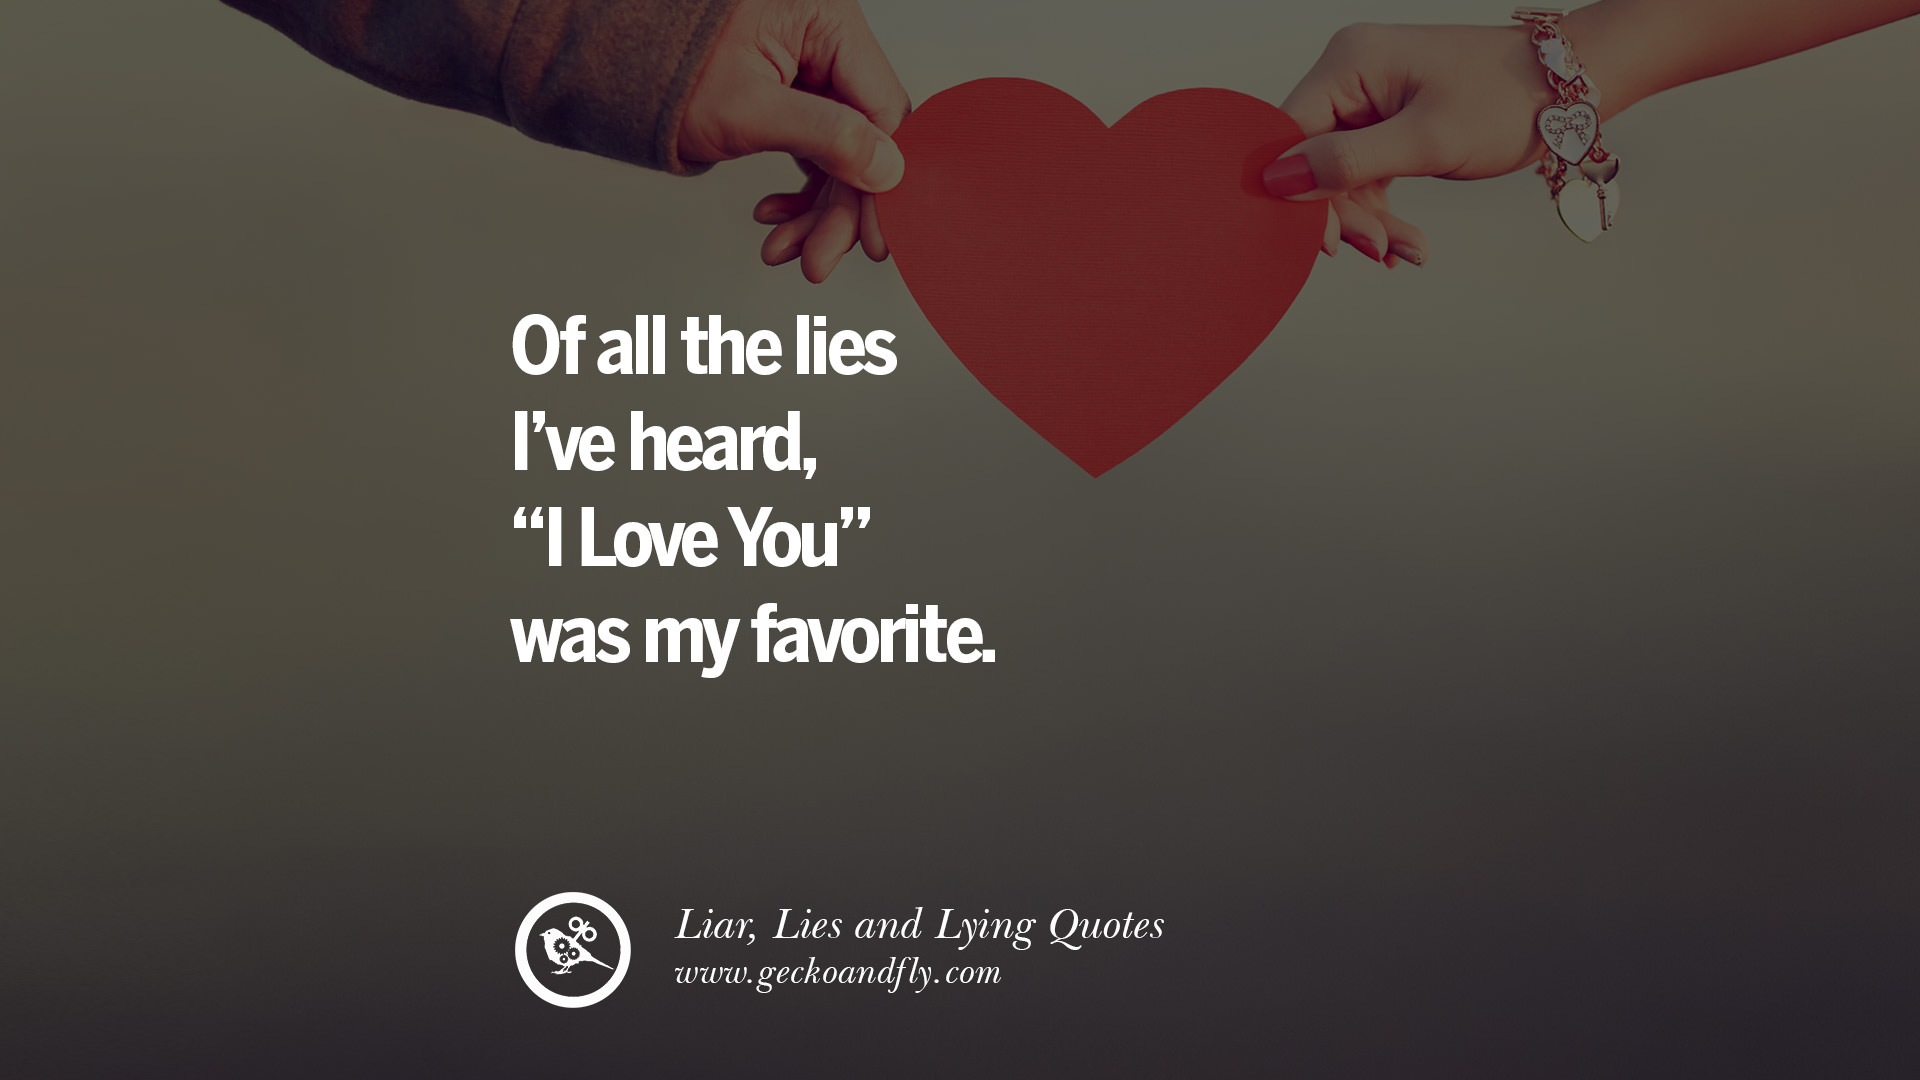 Why lie quotes